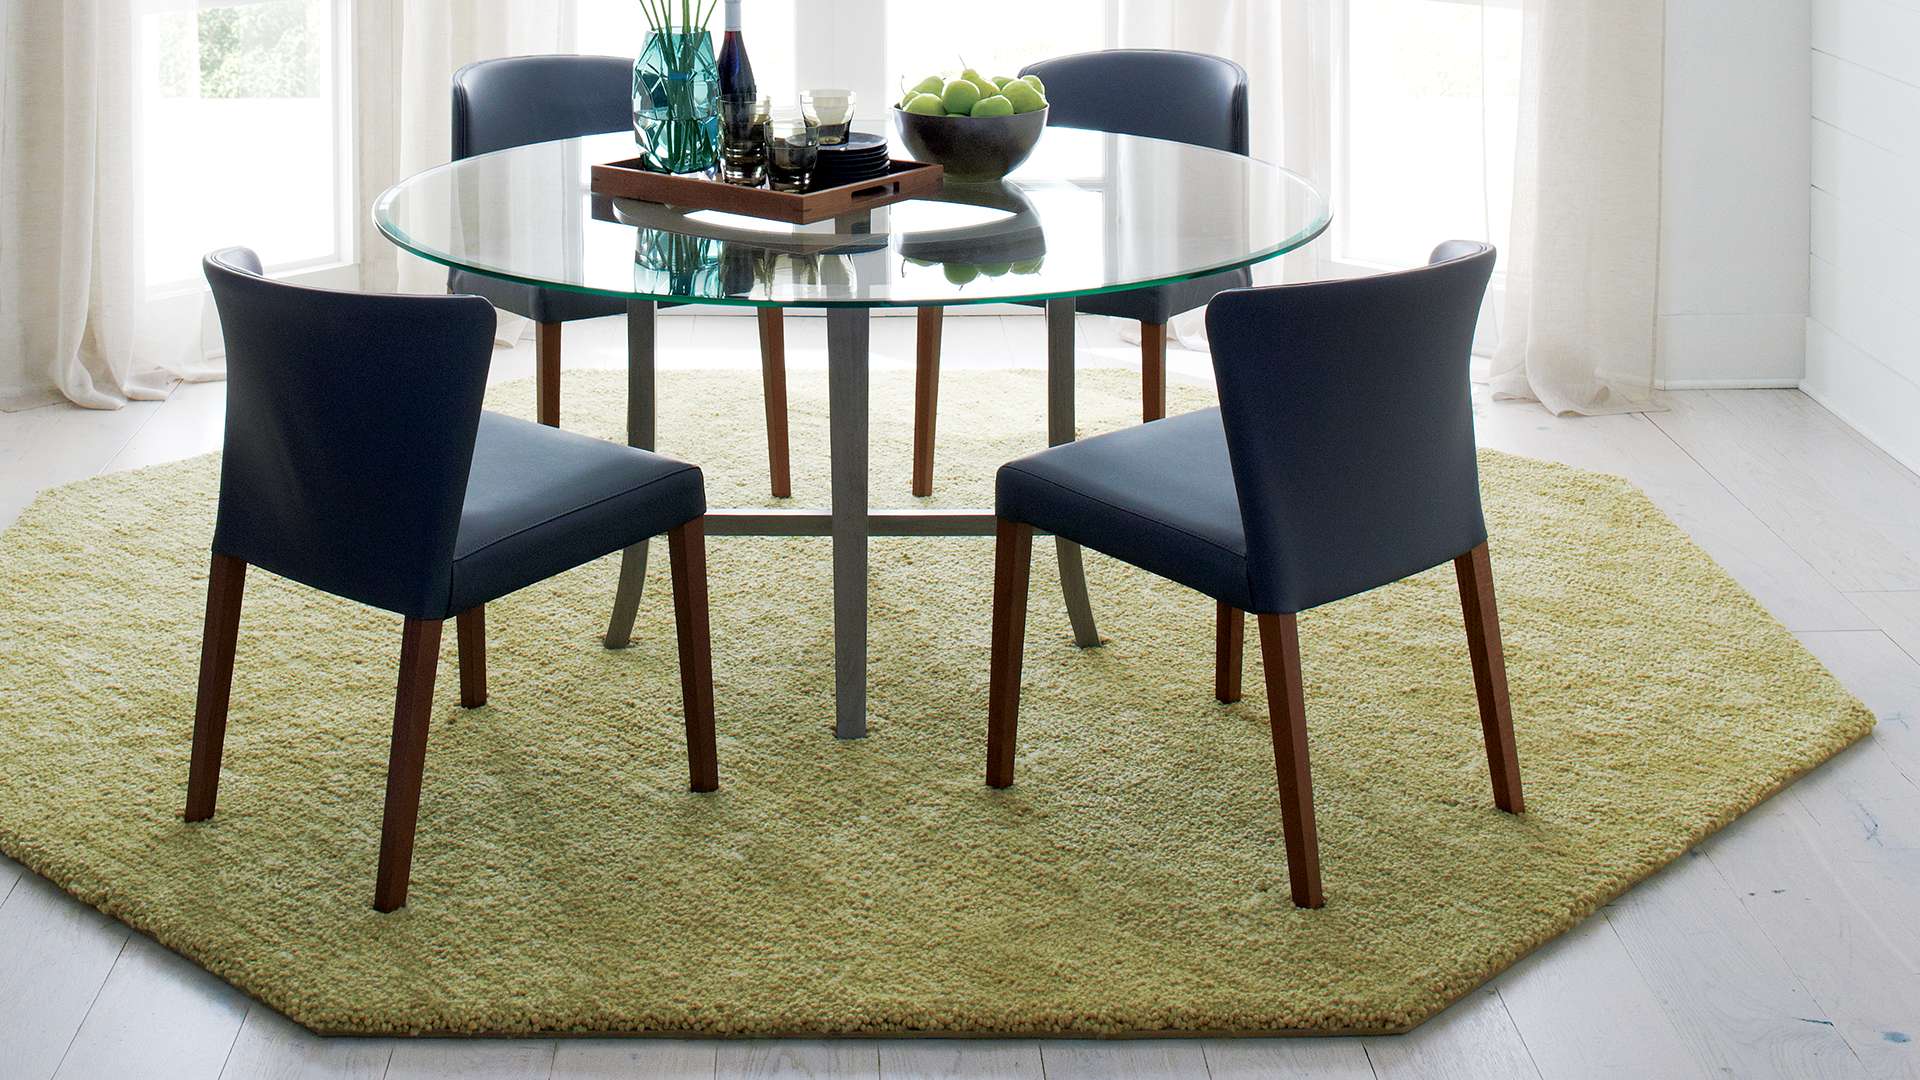 Curran dining chairs and halo grey dining table on top of a green octagonal custom made rug.